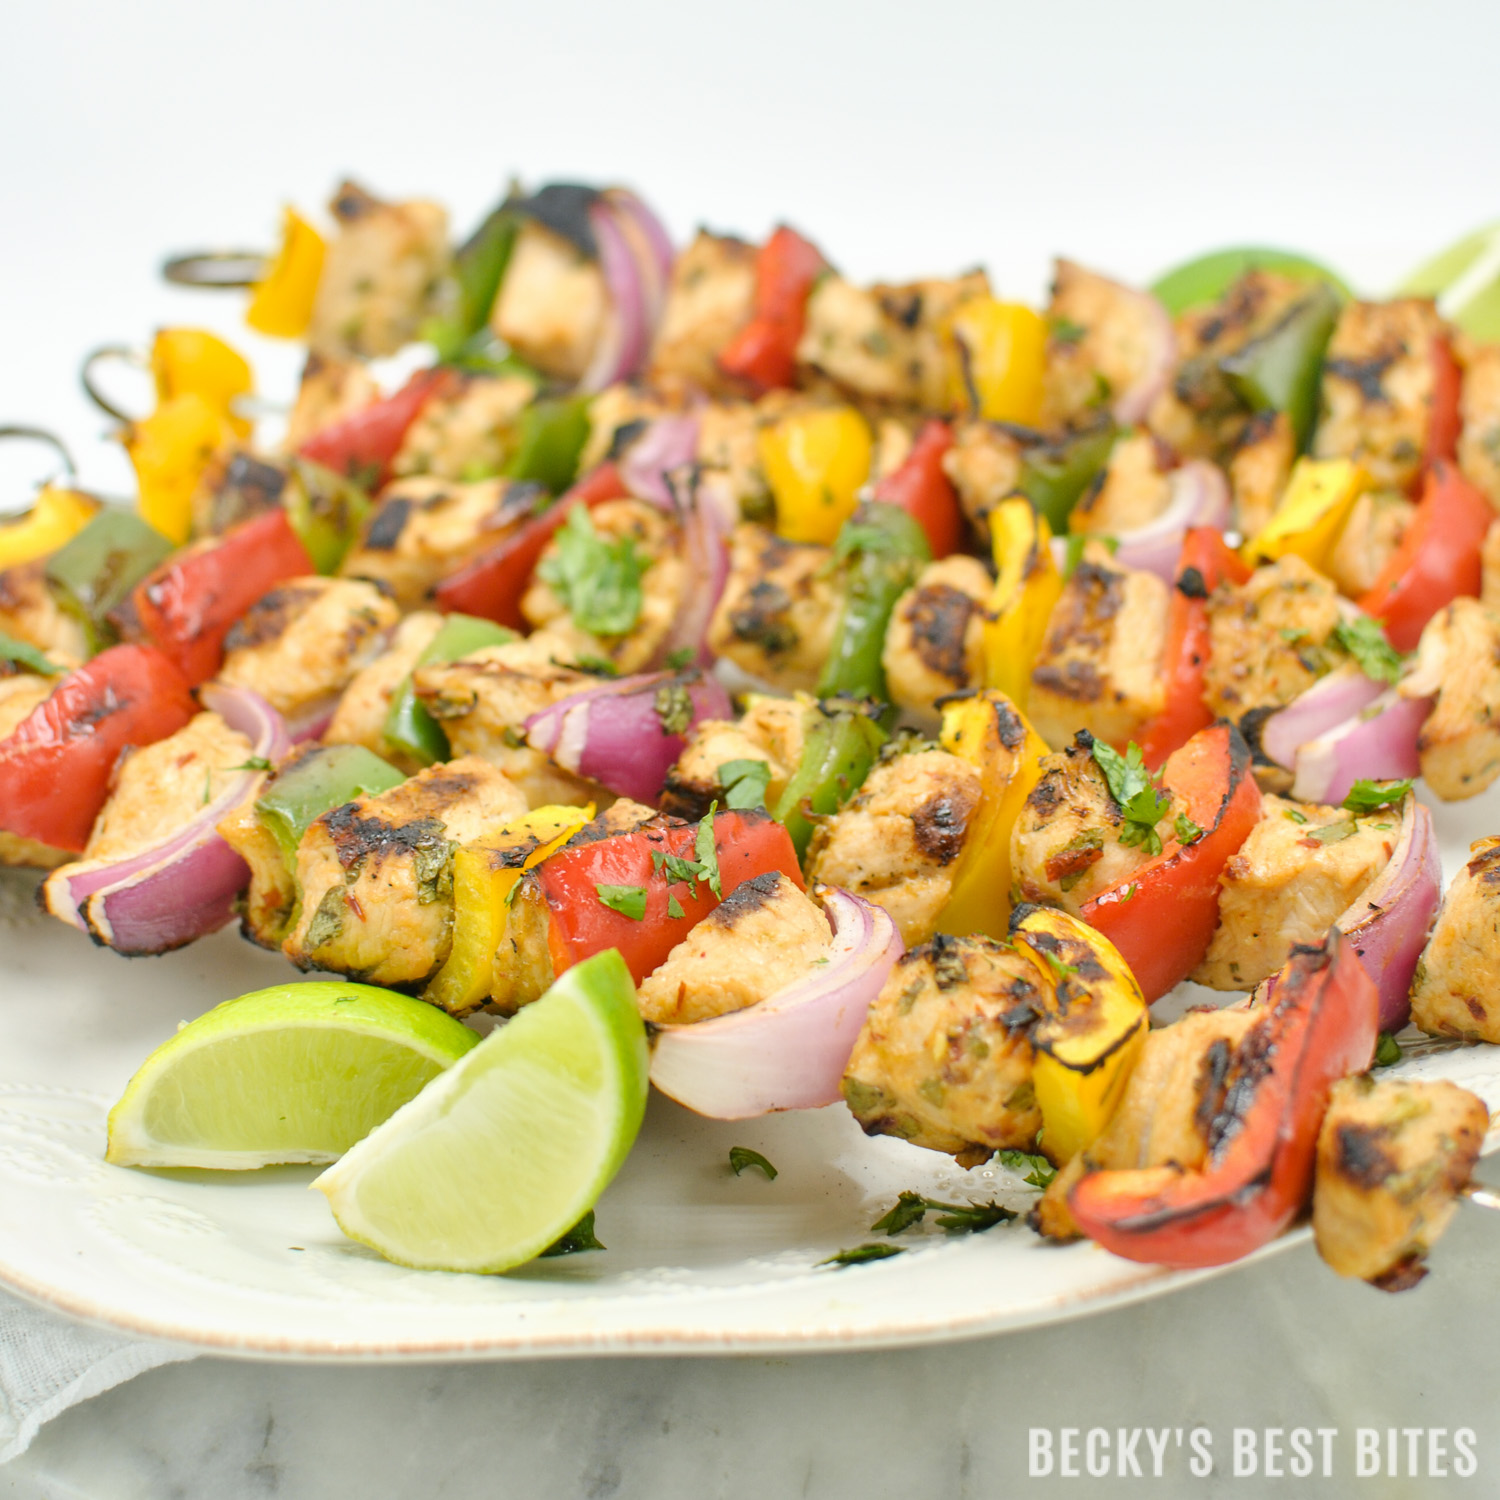 Grill the unexpected at your next summer cookout with Chipotle Lime Turkey Kabobs and Chipotle Cilantro Rice! A healthy dinner recipe idea to try turkey the next time you fire up the grill! #ad #TryTurkey | beckysbestbites.com